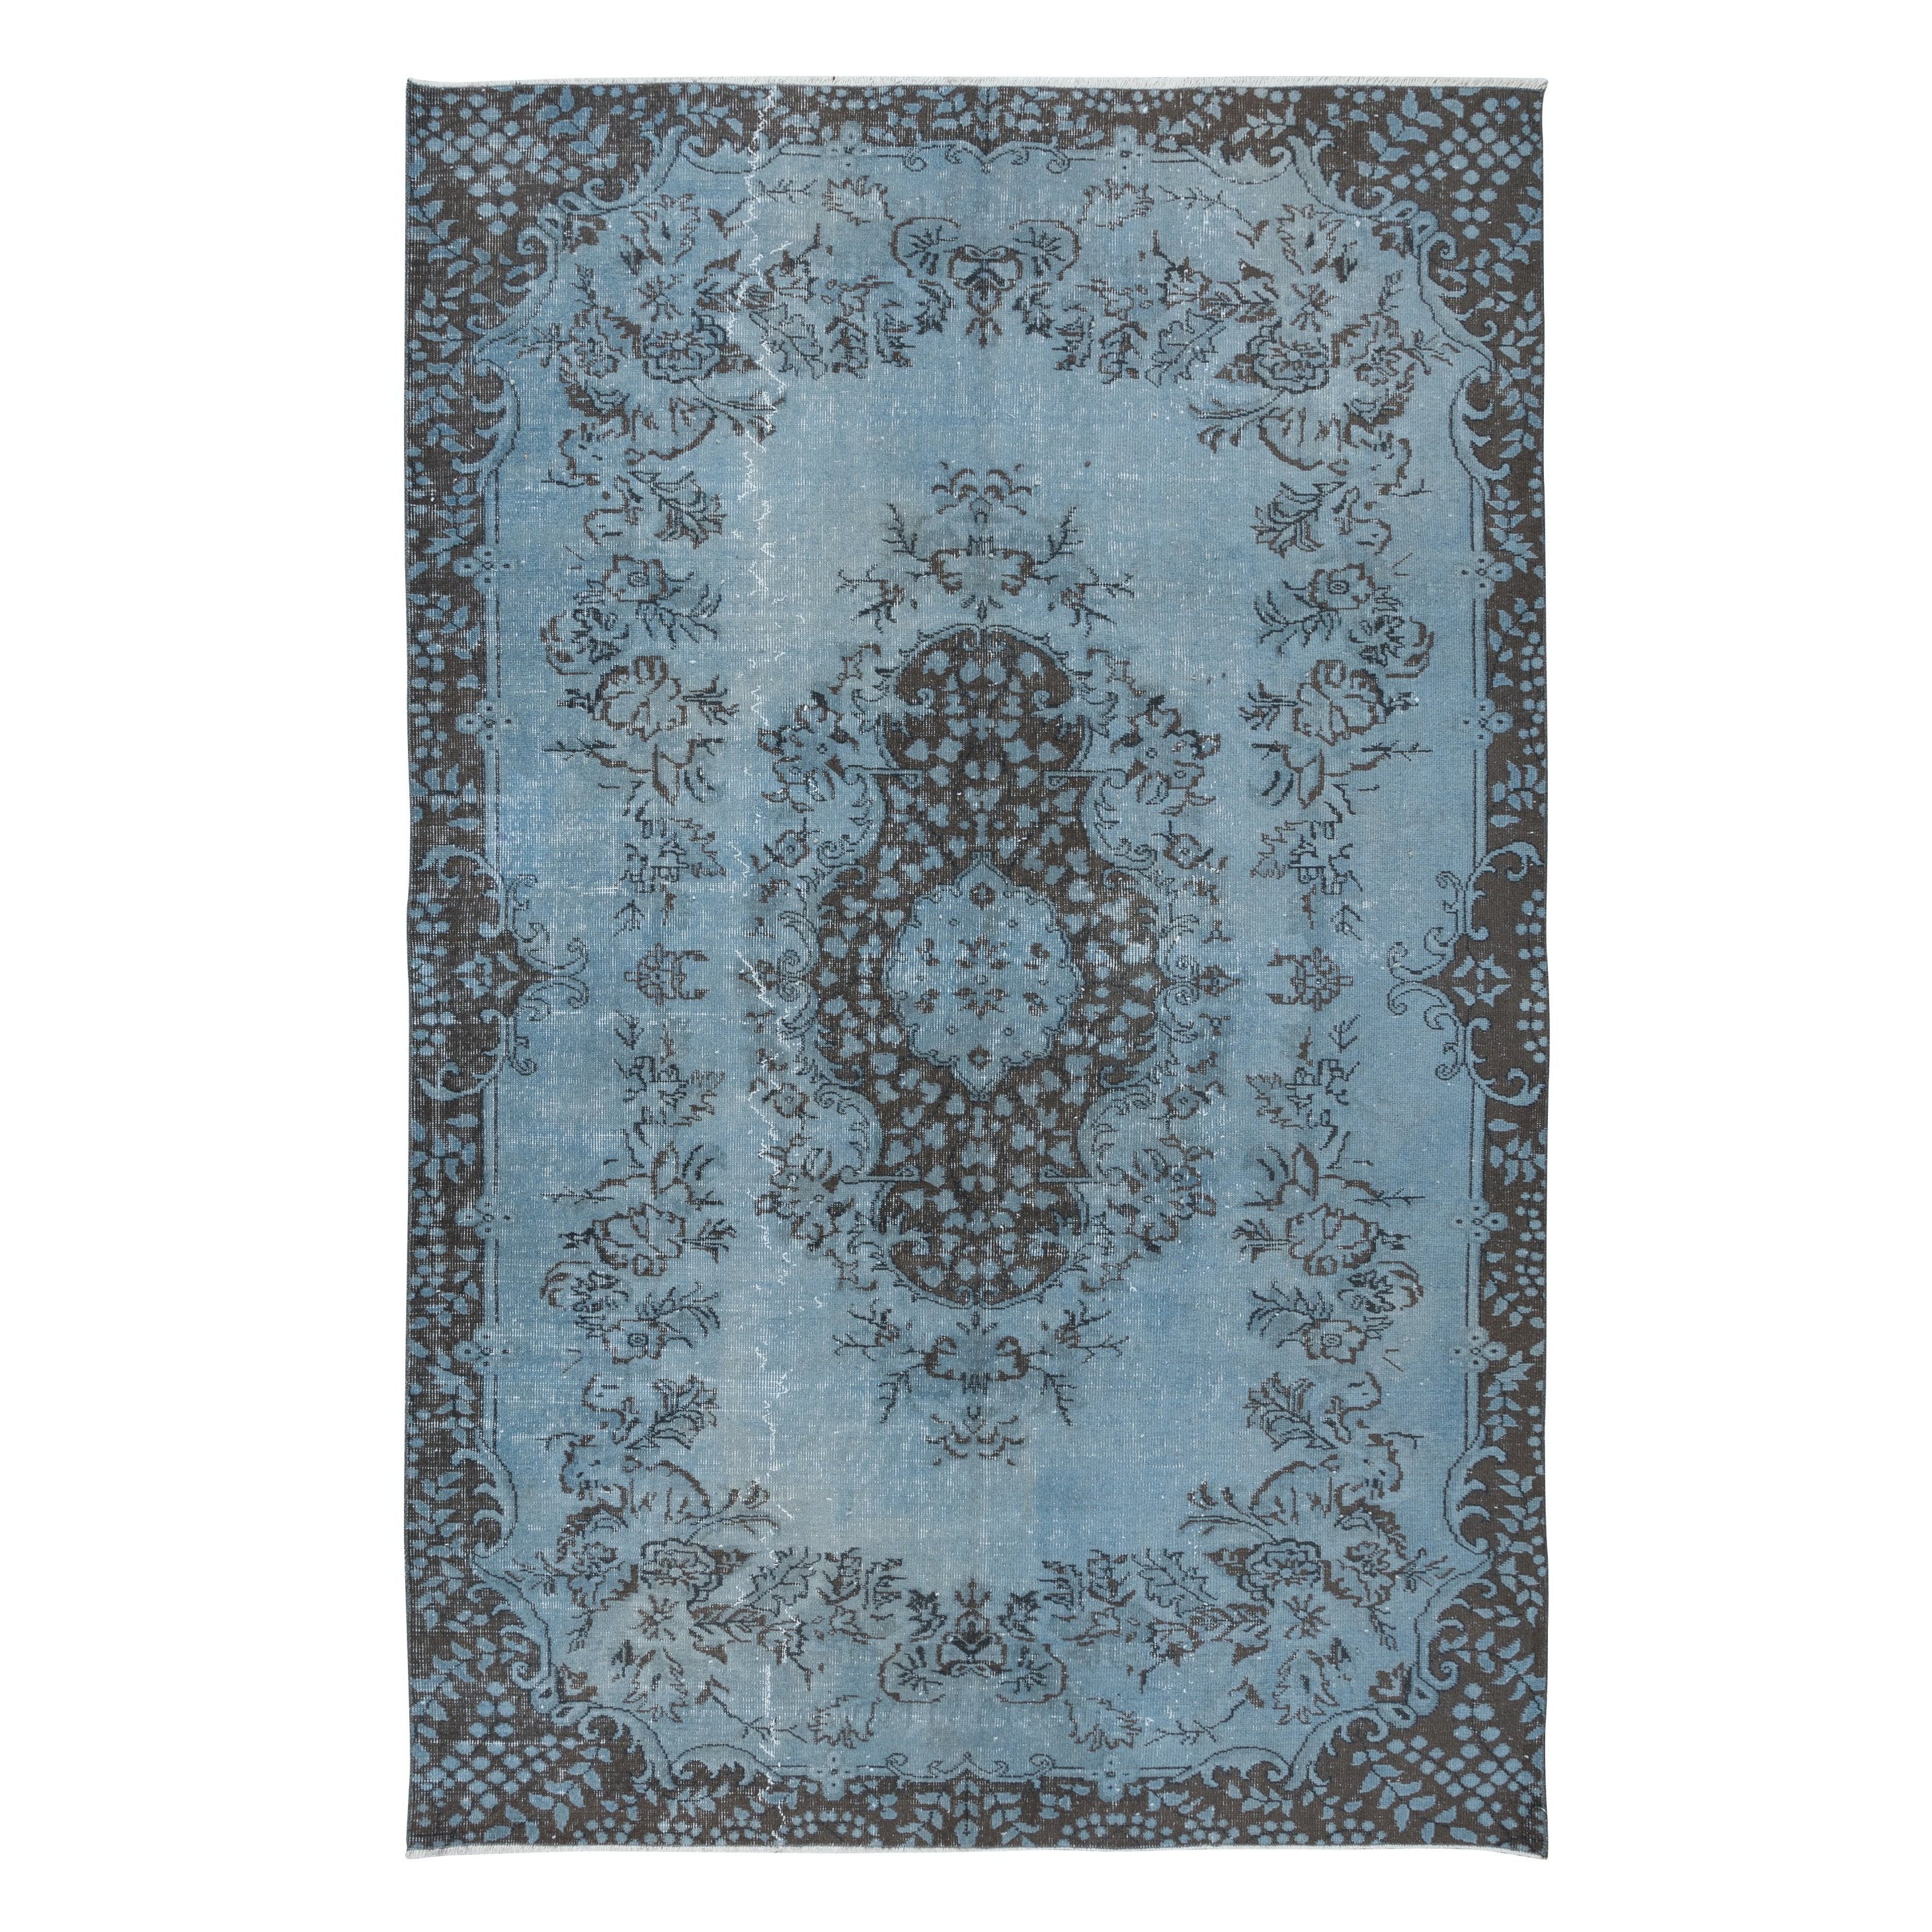 6x9.3 Ft Contemporary Handmade Rug in Light Blue, Sky Blue Anatolian Wool Carpet For Sale